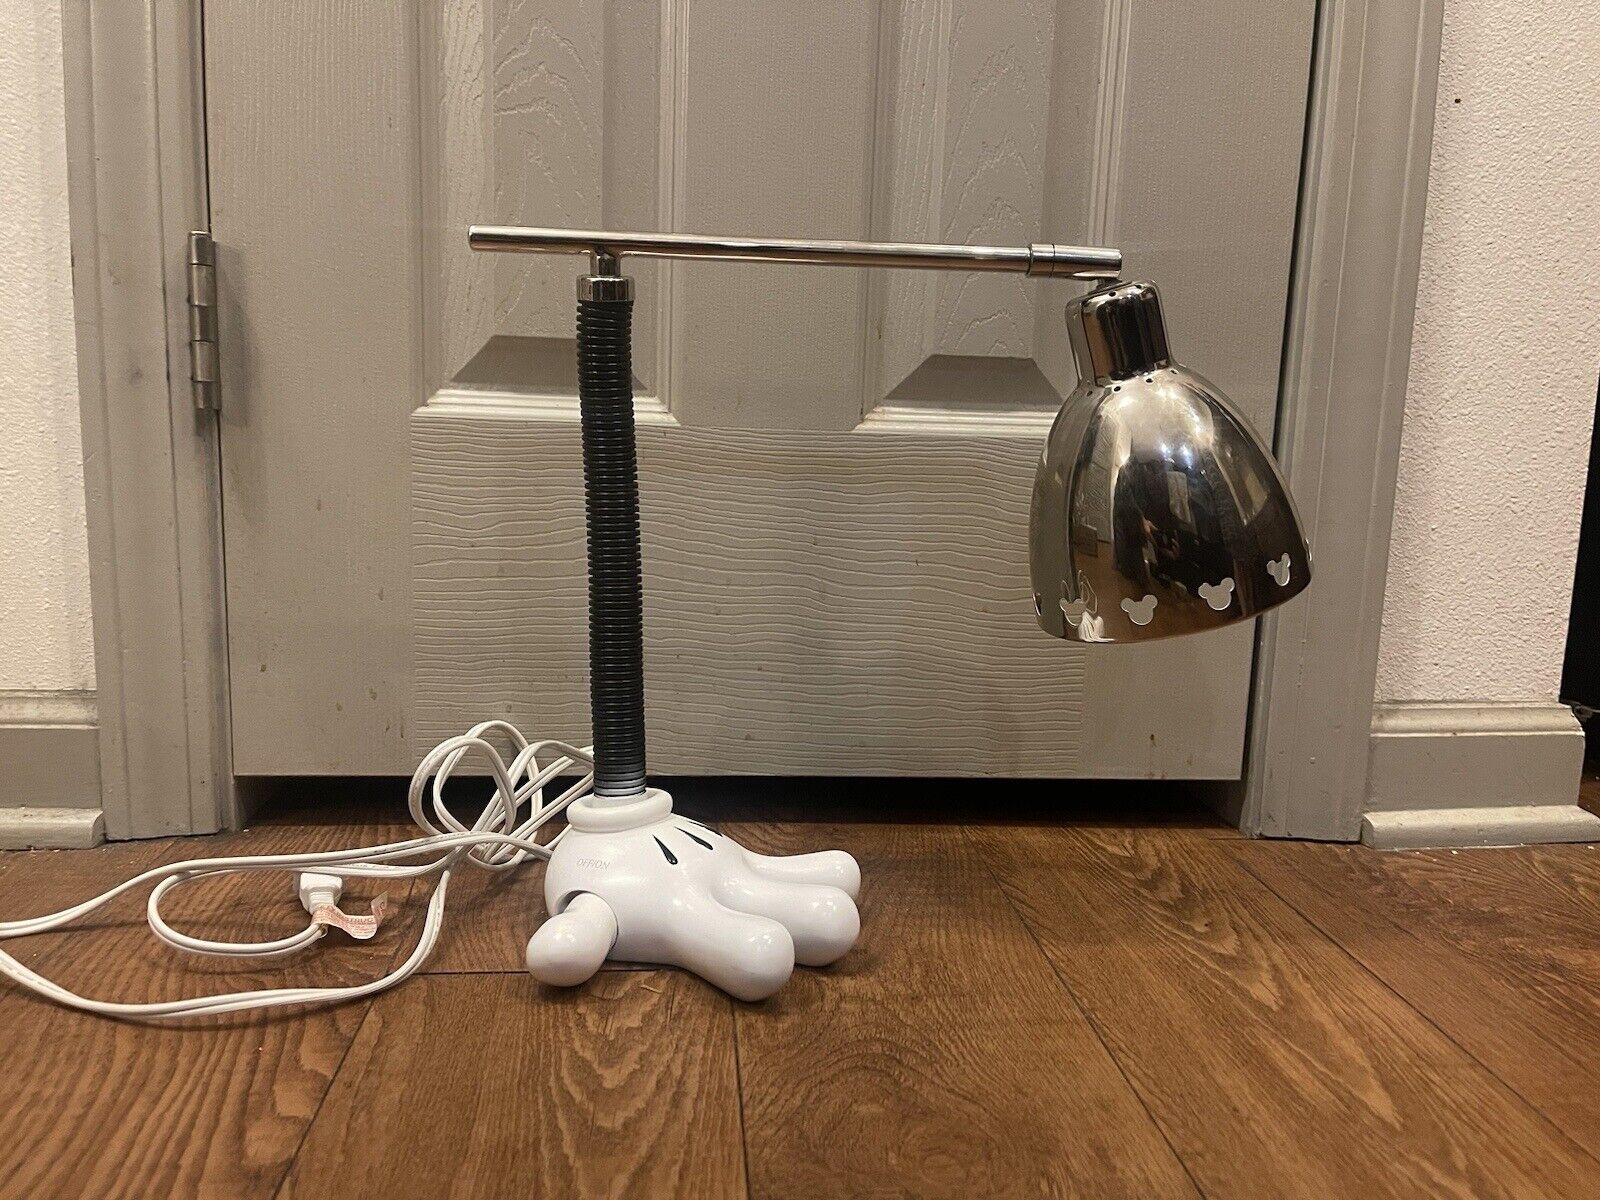 Mickey Mouse Disney Adjustable Stainless Desk Lamp Metal #46575 EUC Works